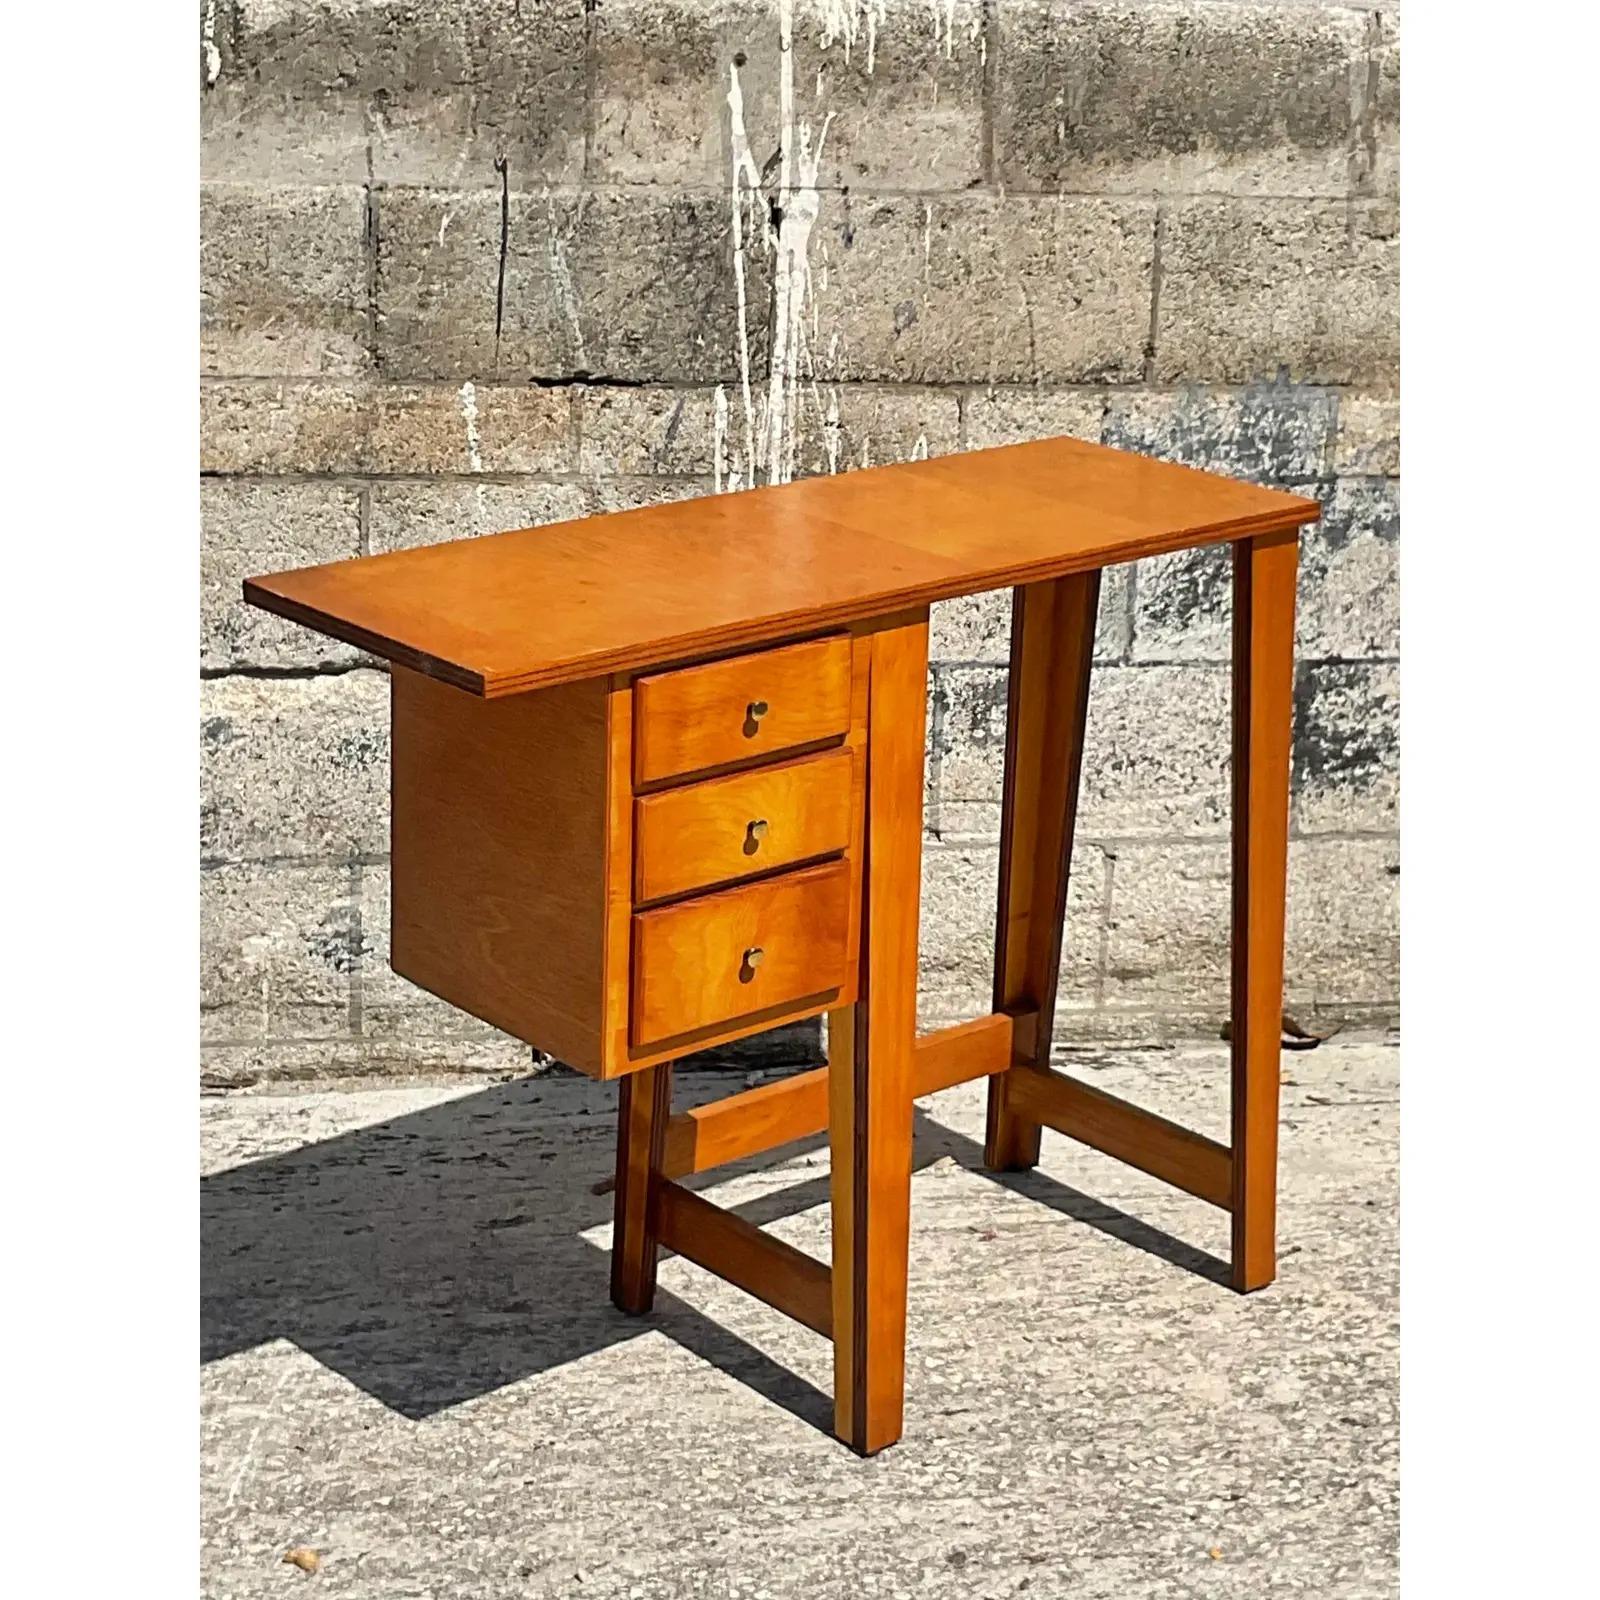 Incredible vintage MCM writing desk. A chic little writing spot that was hand made. Constructed in plywood in a really iconic MCM look. Acquired from a Palm Beach estate.